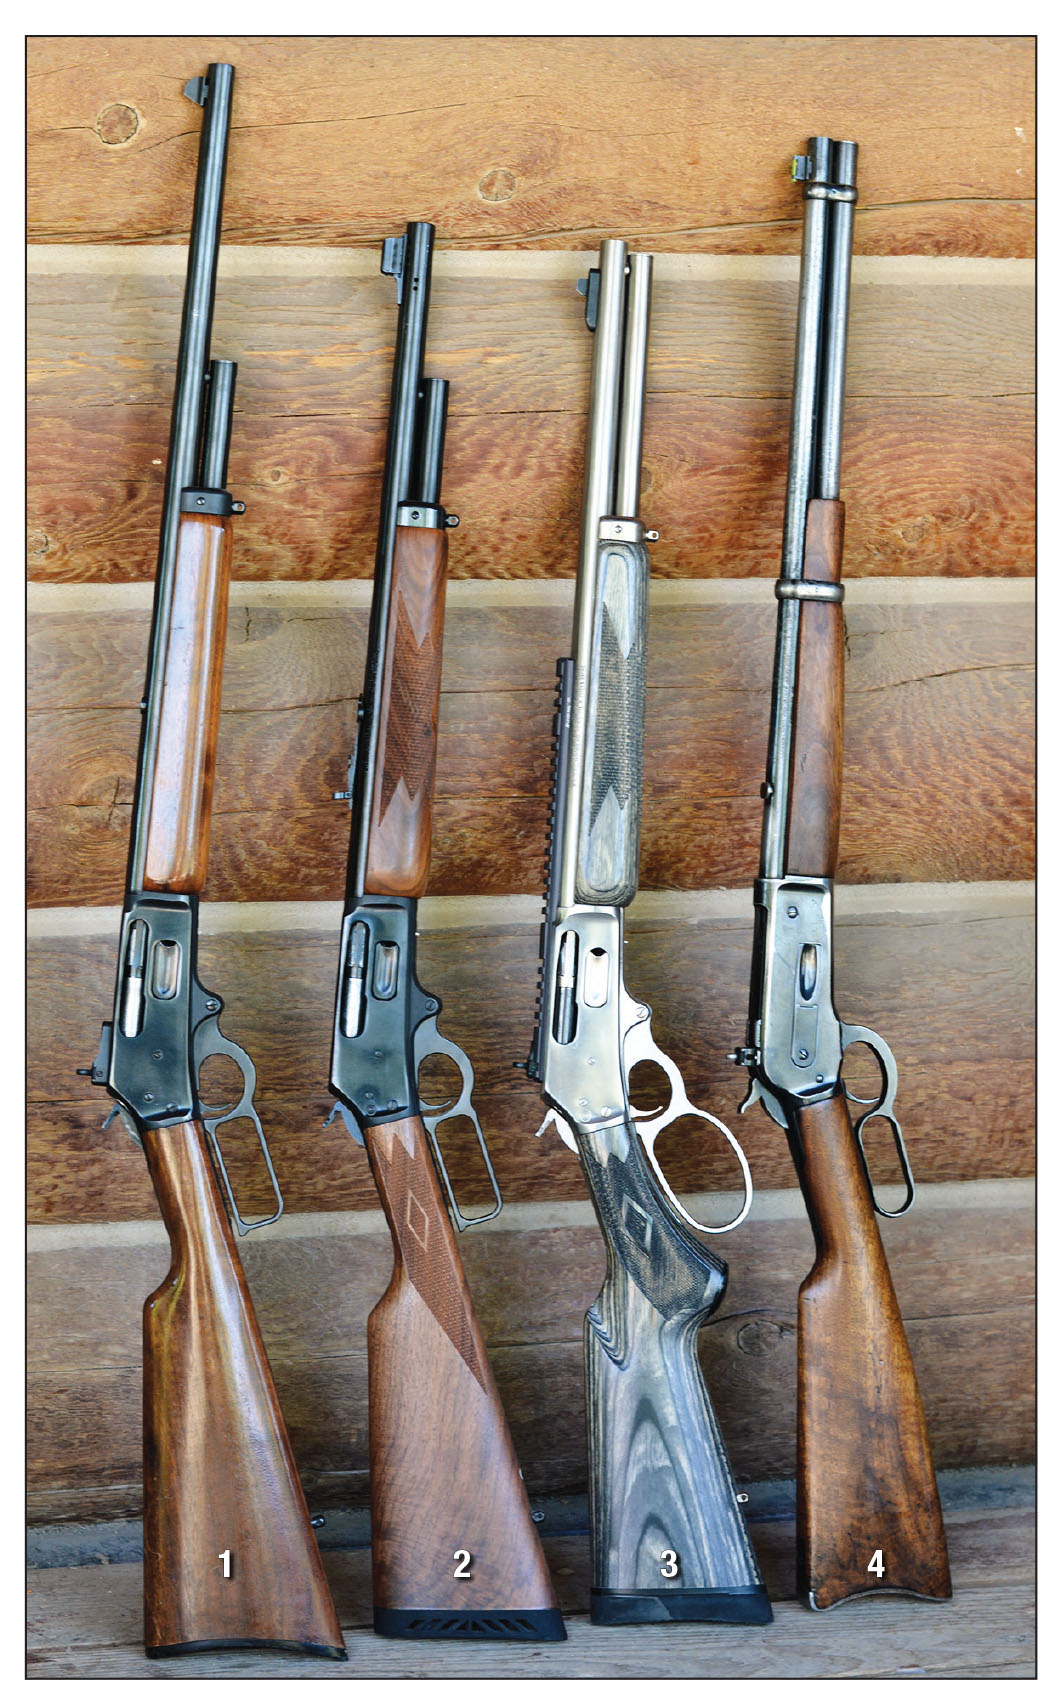 Modern lever-action rifles are popular with hunters and big-game guides. Examples include the (1) Marlin Model 1895 with a 22-inch barrel, (2) Marlin Model 1895G with 18½-inch barrel, (3) Marlin Model 1895SBL with 18½-inch barrel and (4) Browning 1886 Carbine.